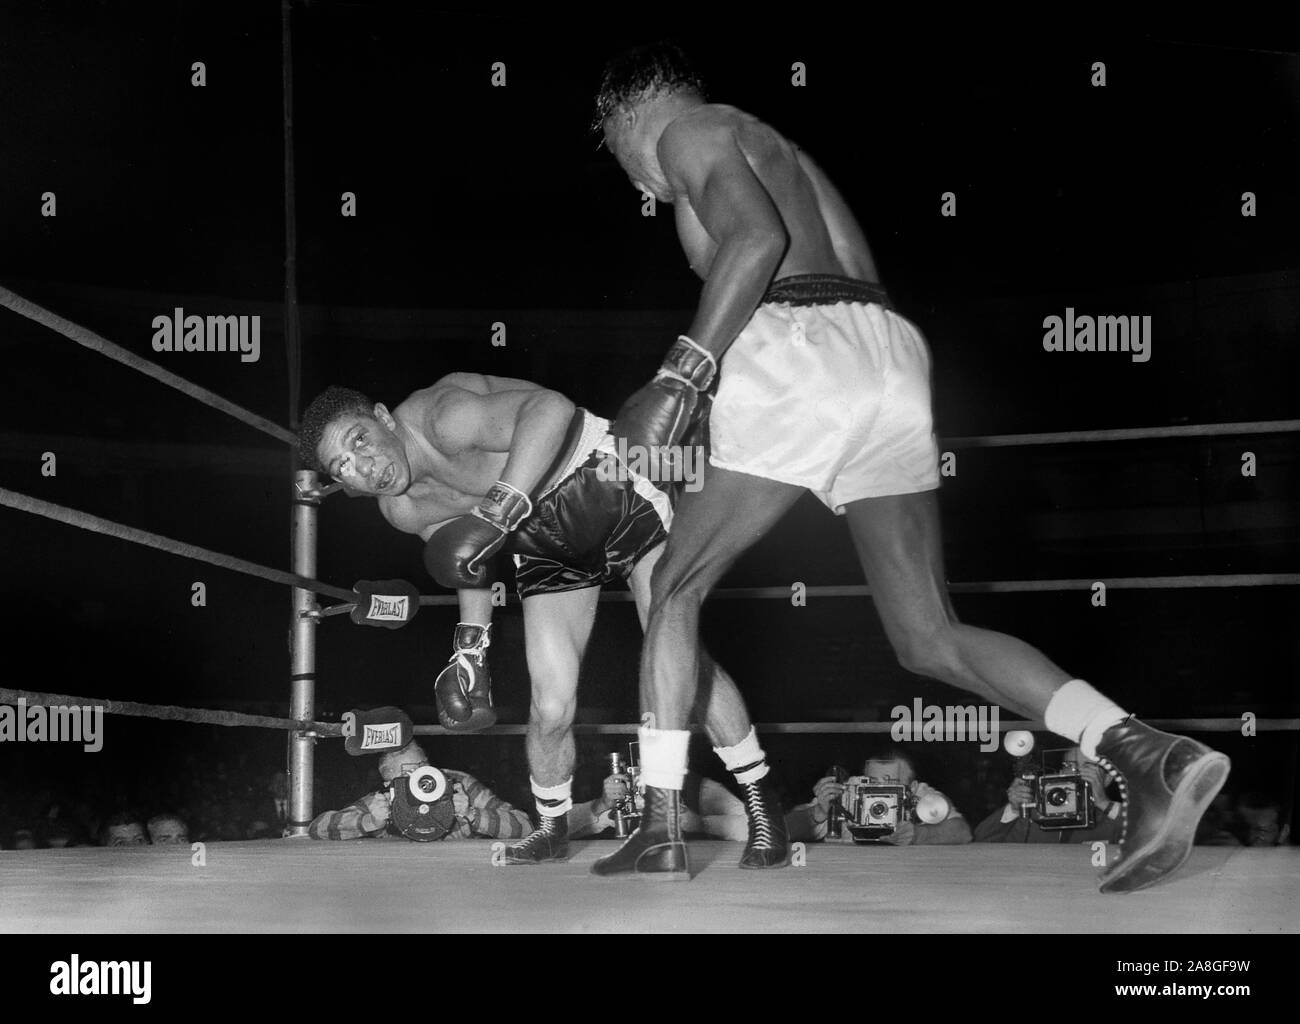 Lightweight boxing champion Joe Brown knocks out challenger Joey Lopes during a match at the Chicago Stadium in December 1957. Stock Photo